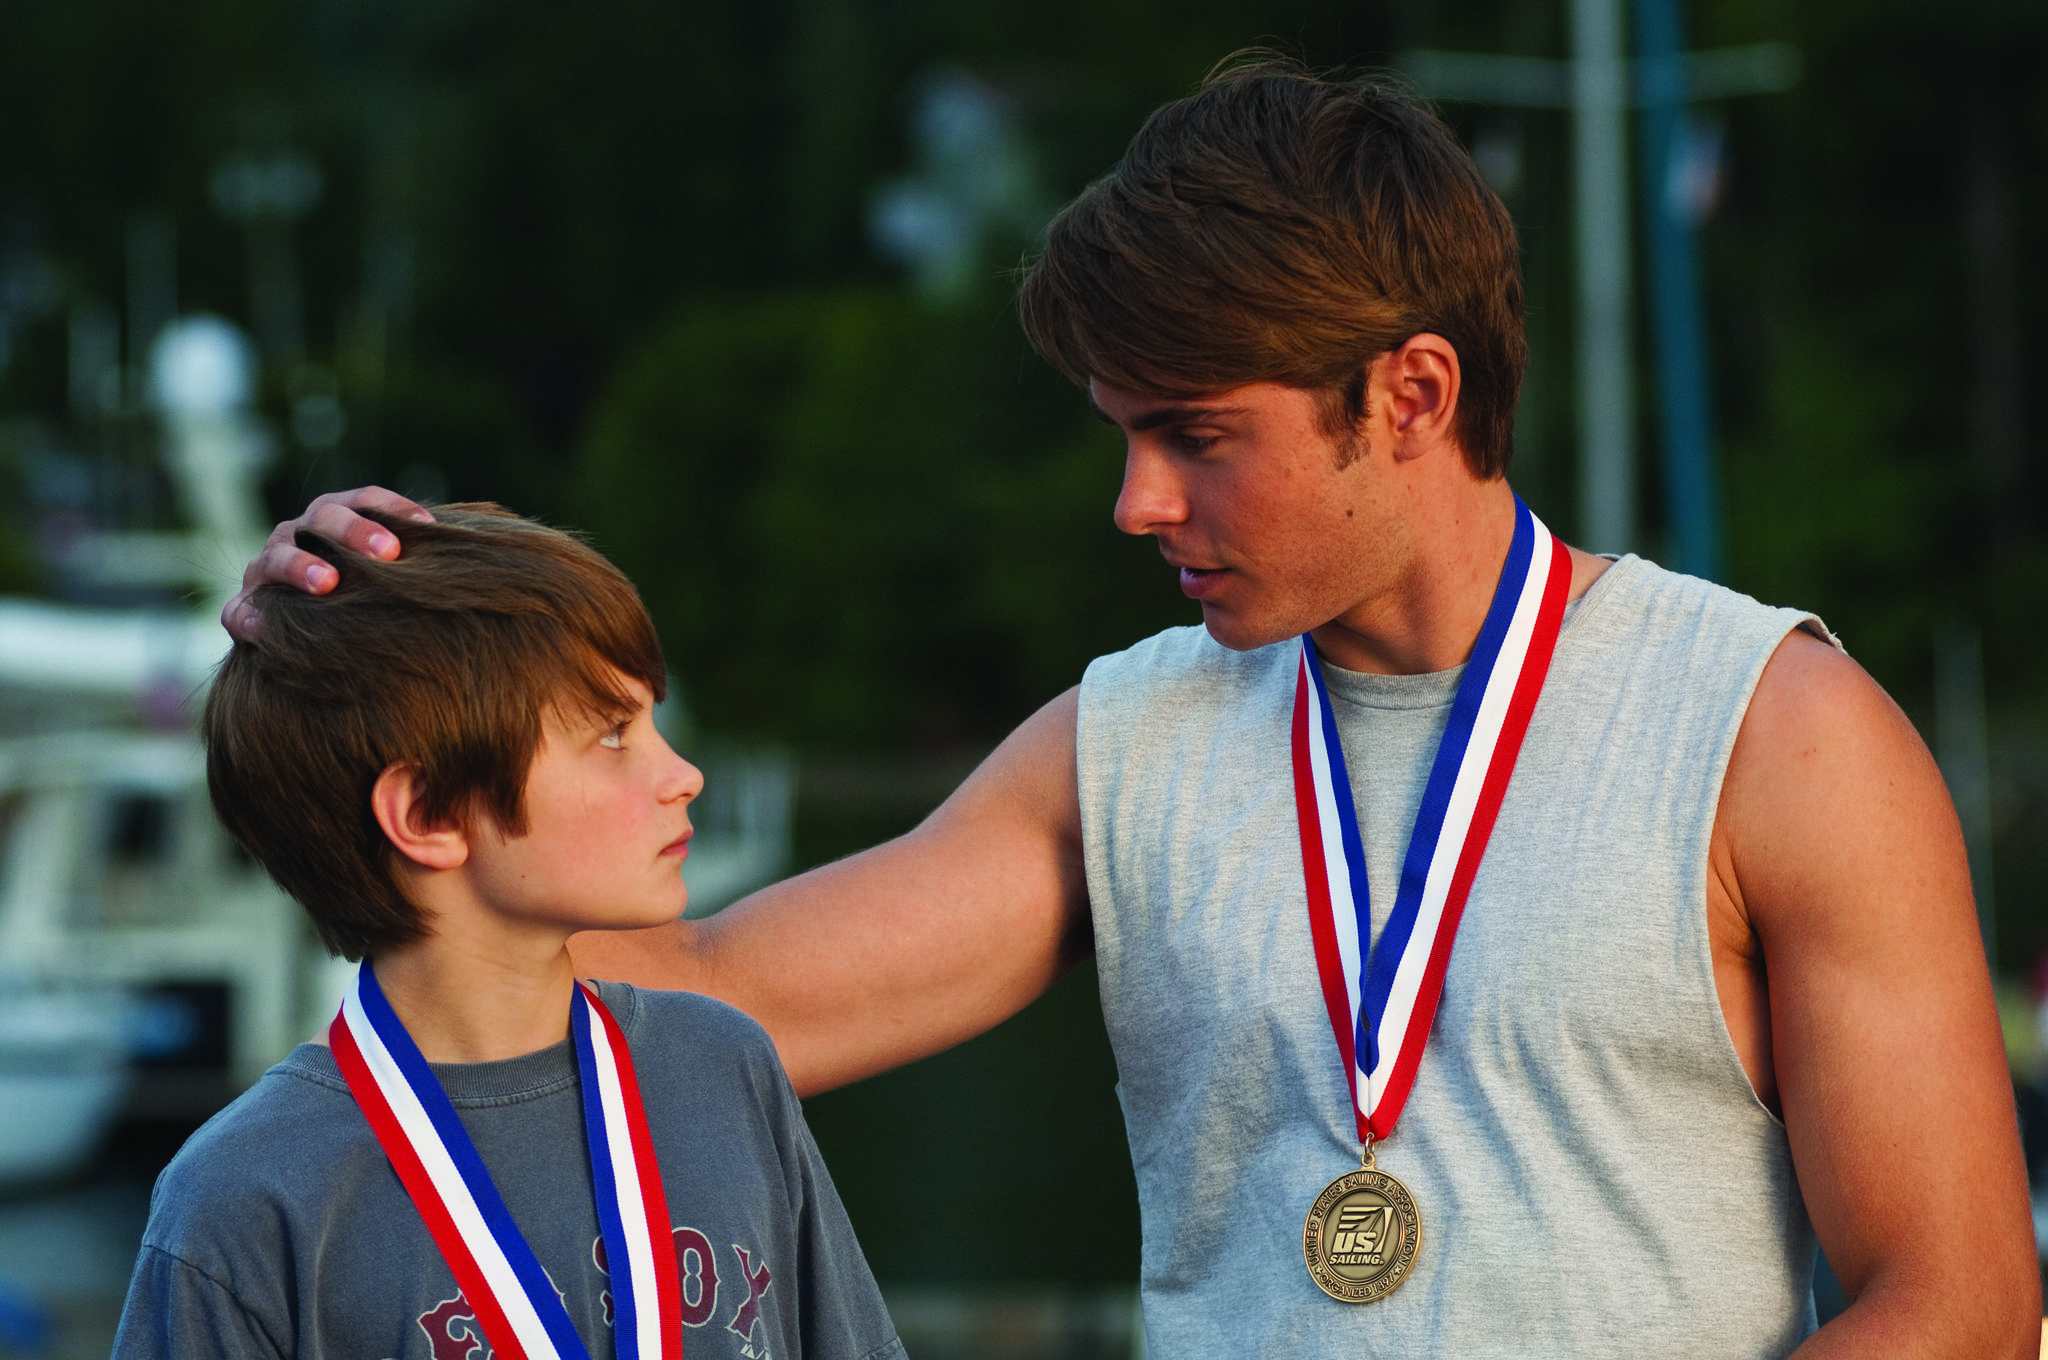 Still of Zac Efron and Charlie Tahan in Charlie St. Cloud (2010)